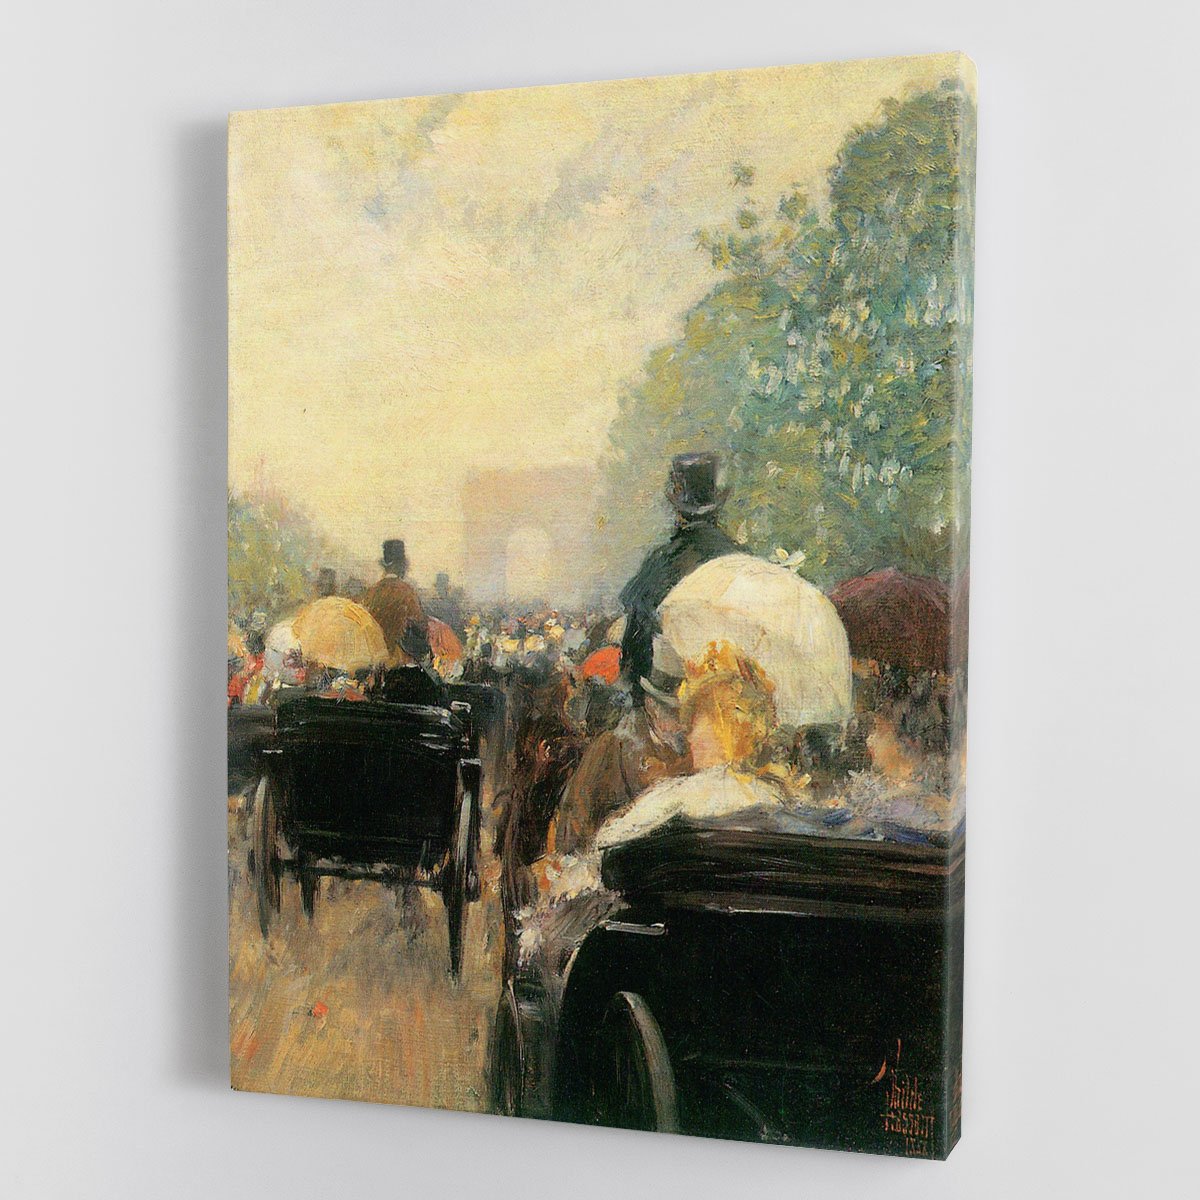 Carriage Parade by Hassam Canvas Print or Poster